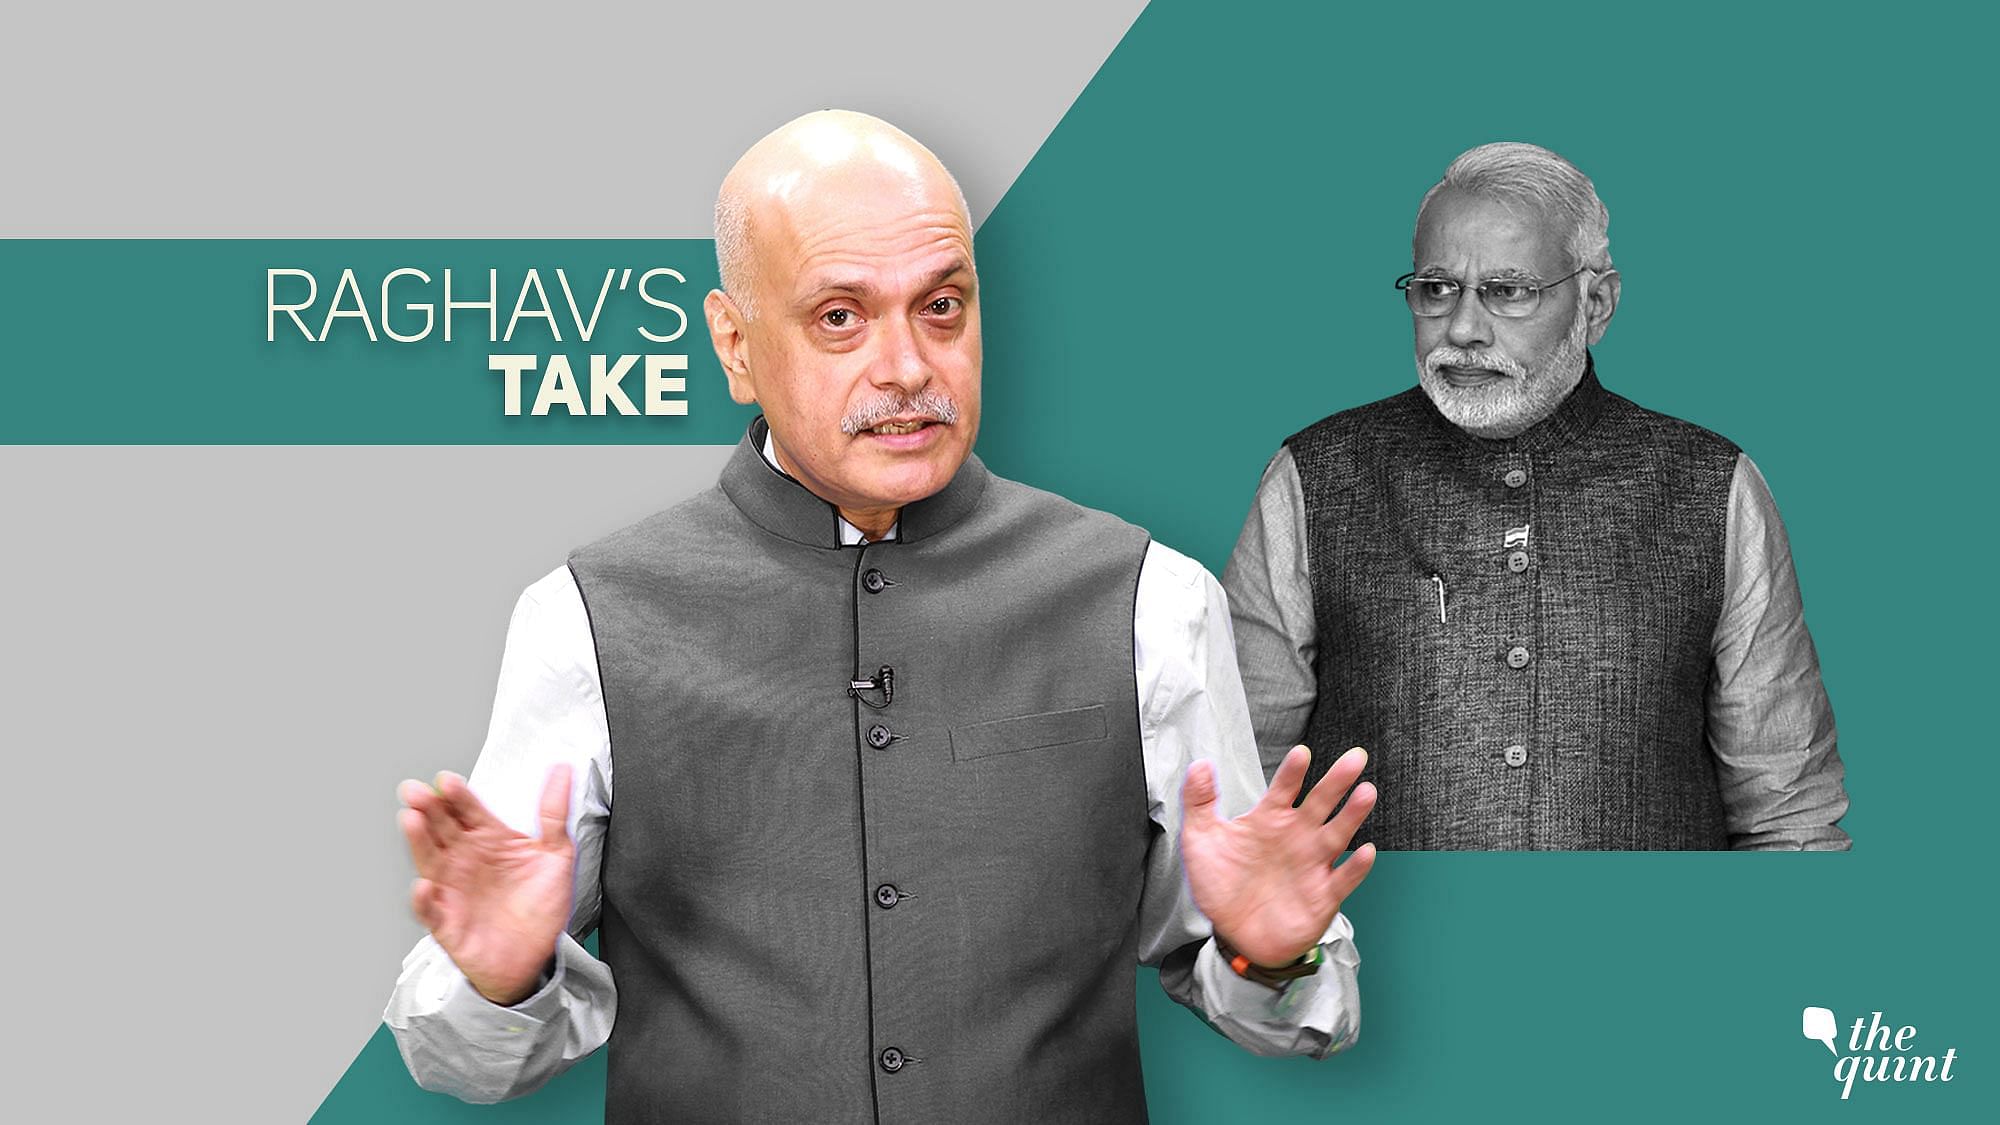 <div class="paragraphs"><p>Modi government's stimulus package to Punjab AAP's call for free electricity, The Quint’s Editor-in-Chief Raghav Bahl shares his views on pertinent developments.</p></div><div class="paragraphs"><p><br></p></div>